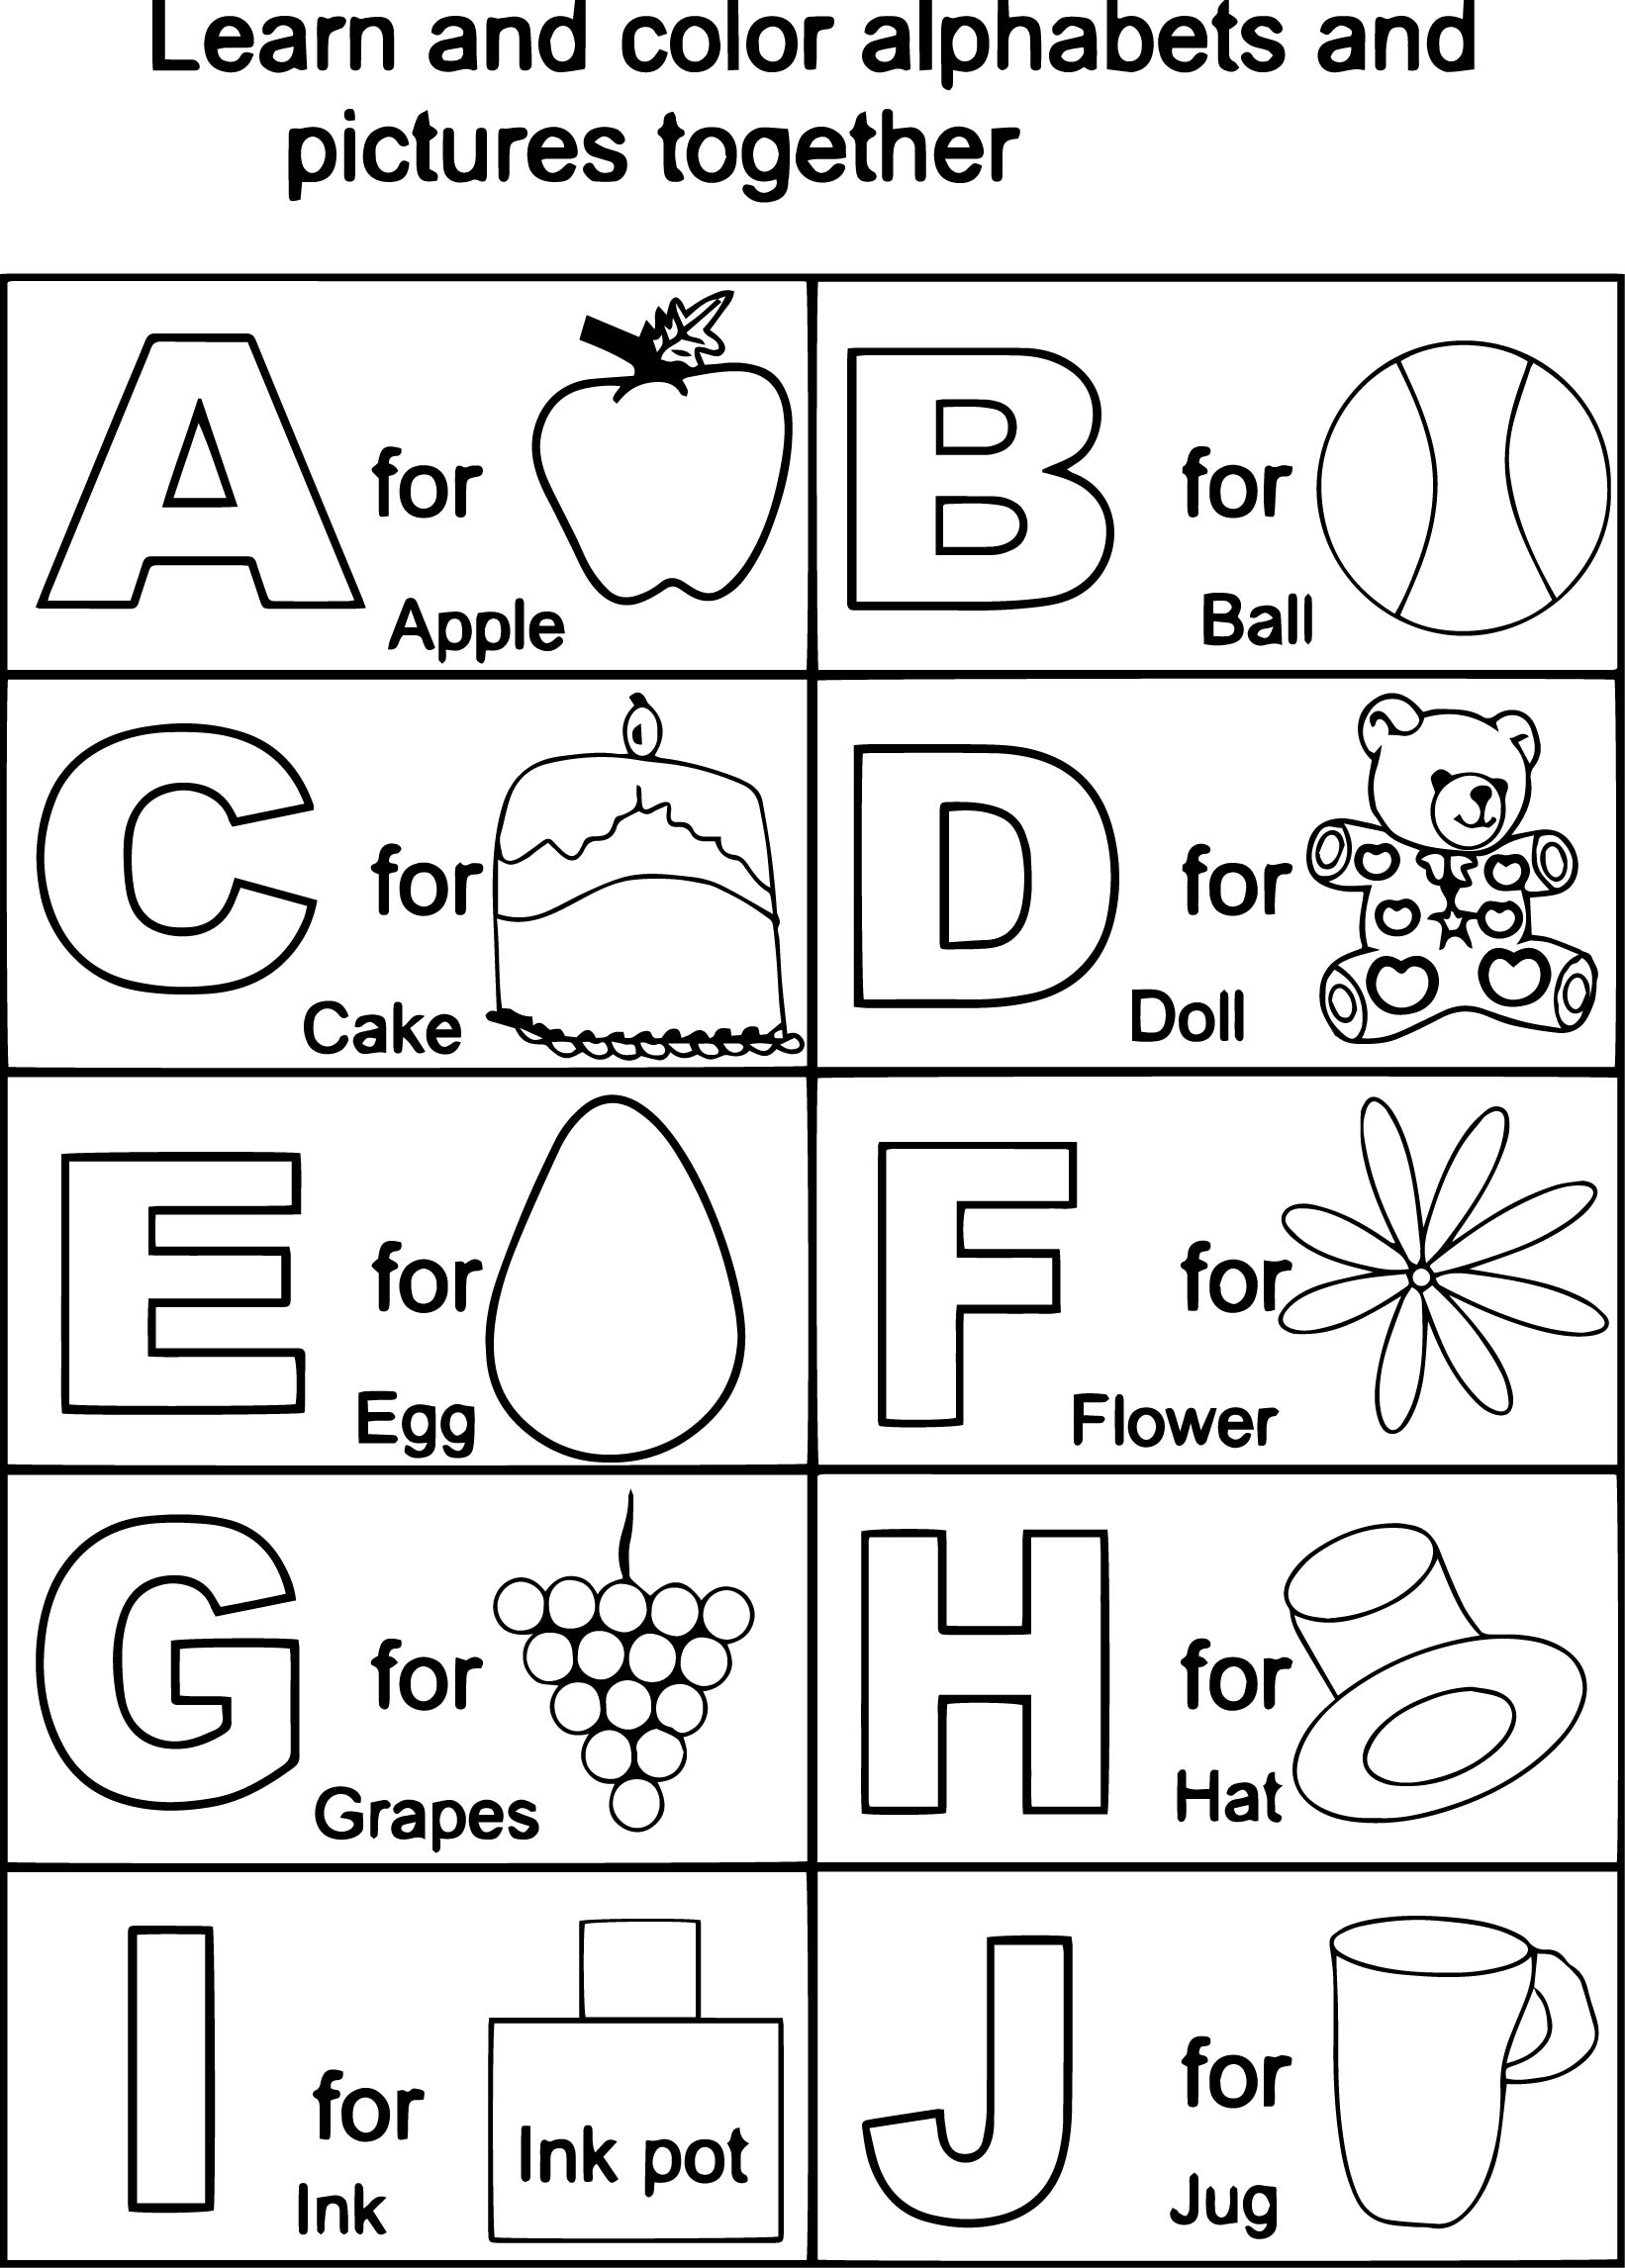 Illuminated Alphabet Coloring Pages Collection Alphabet Coloring Pages A Z 2 Pictures Sabadaphnecottage